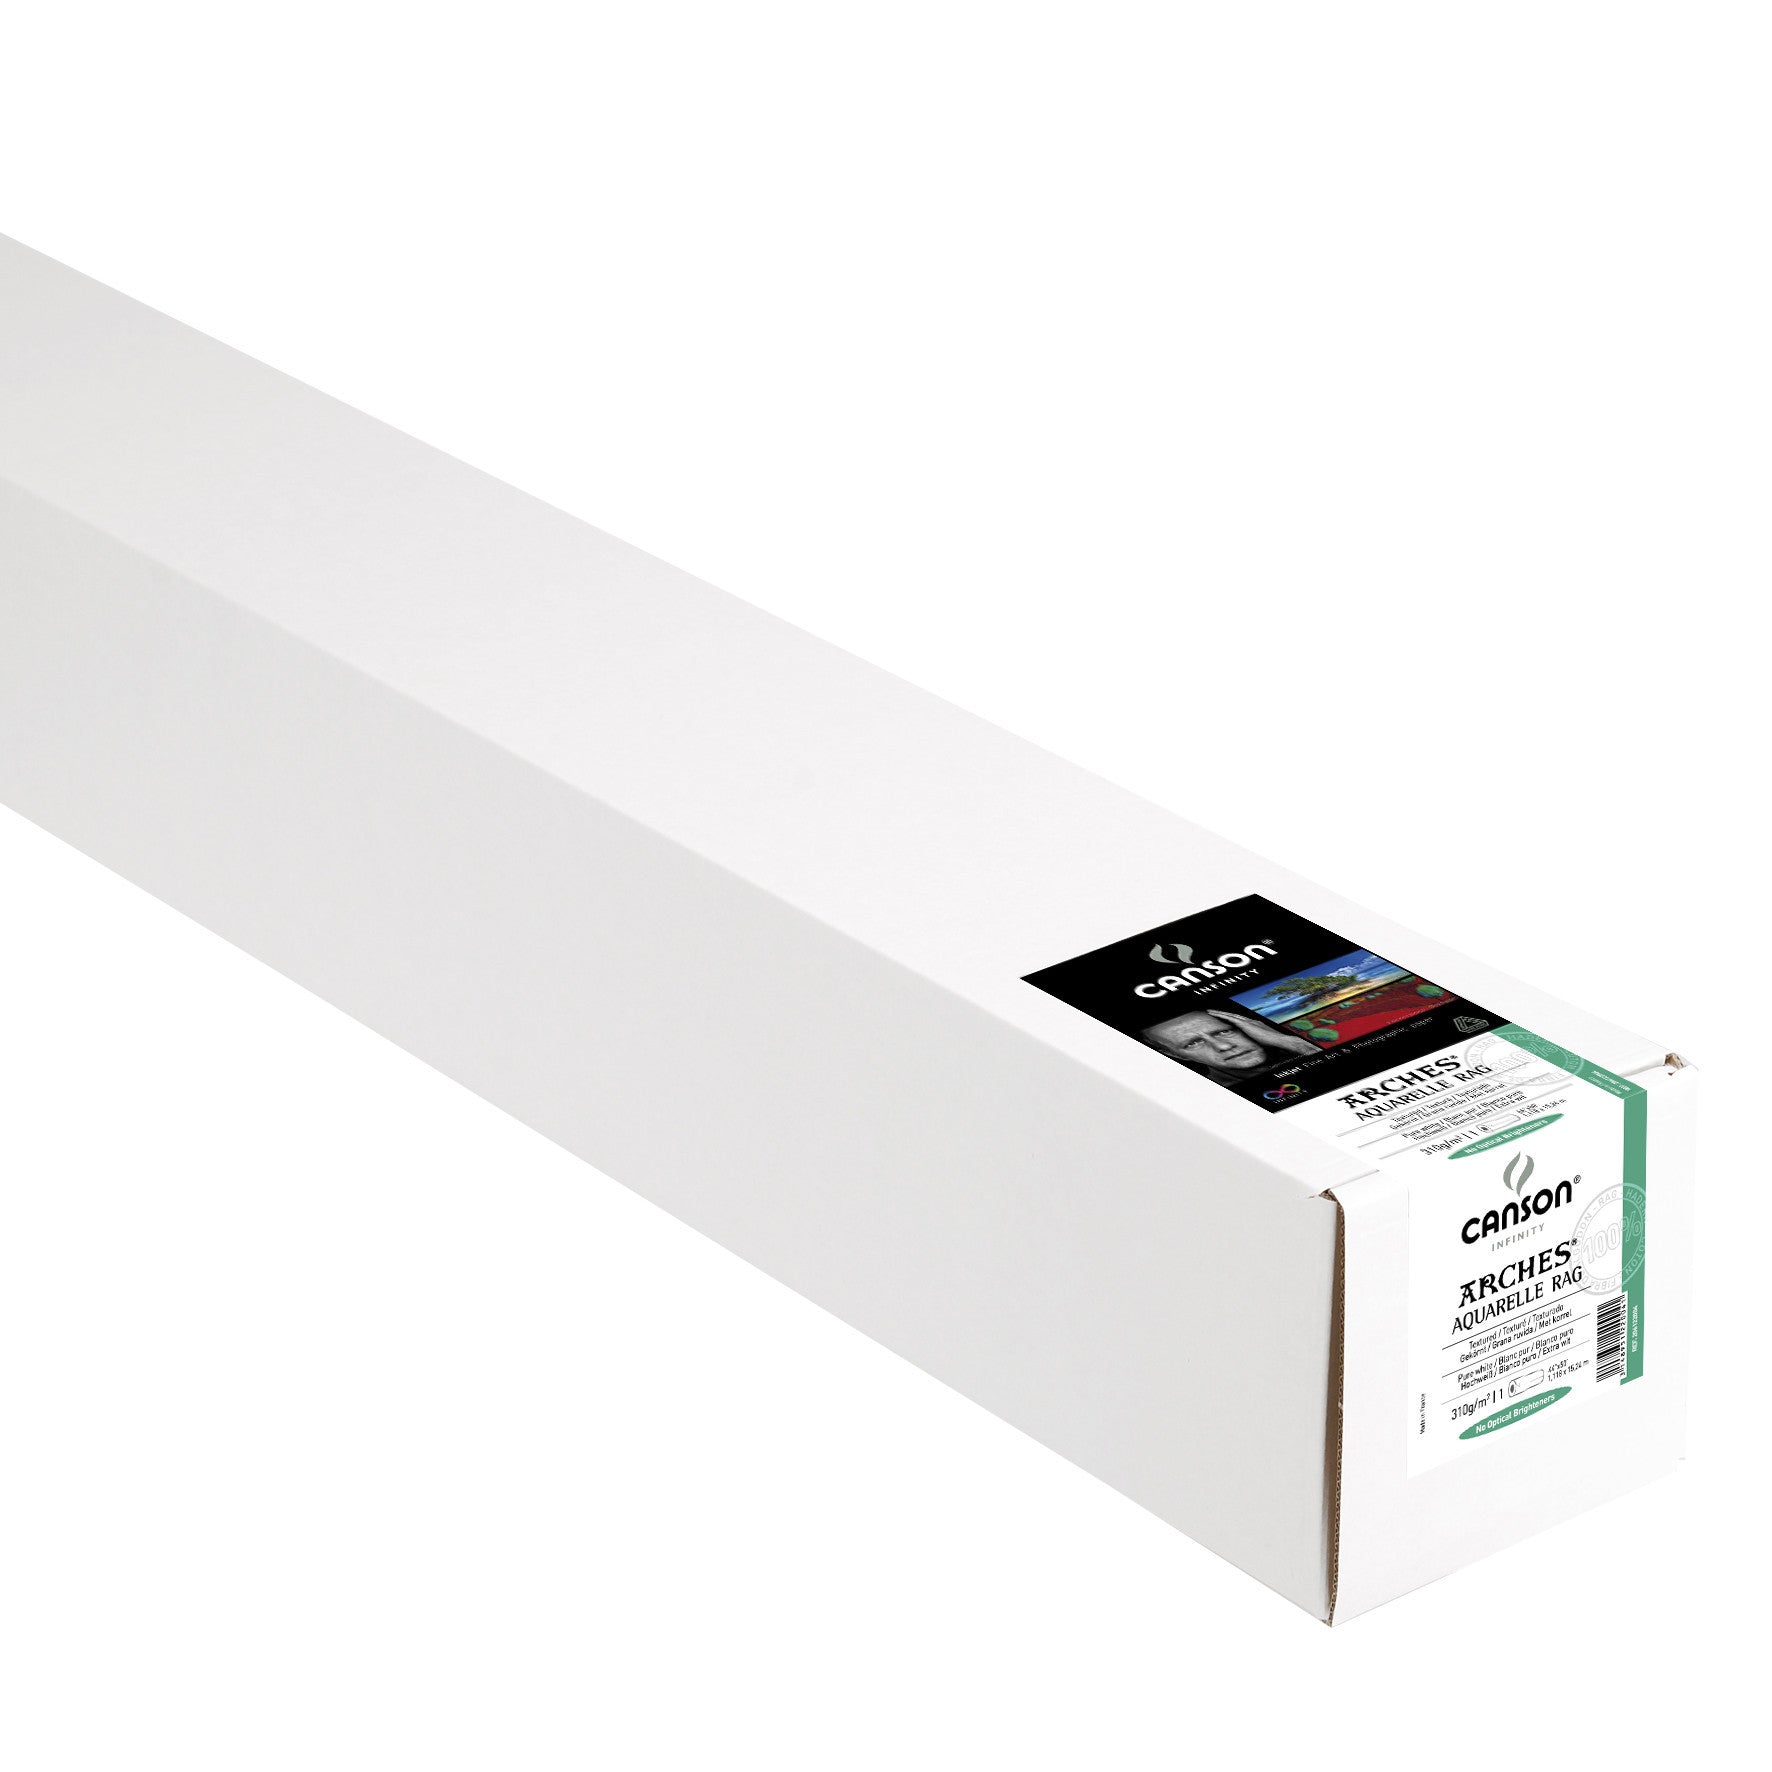 Canson Infinity Aquarelle Rag - 310gsm - 44"x50' roll - Wall Your Photos